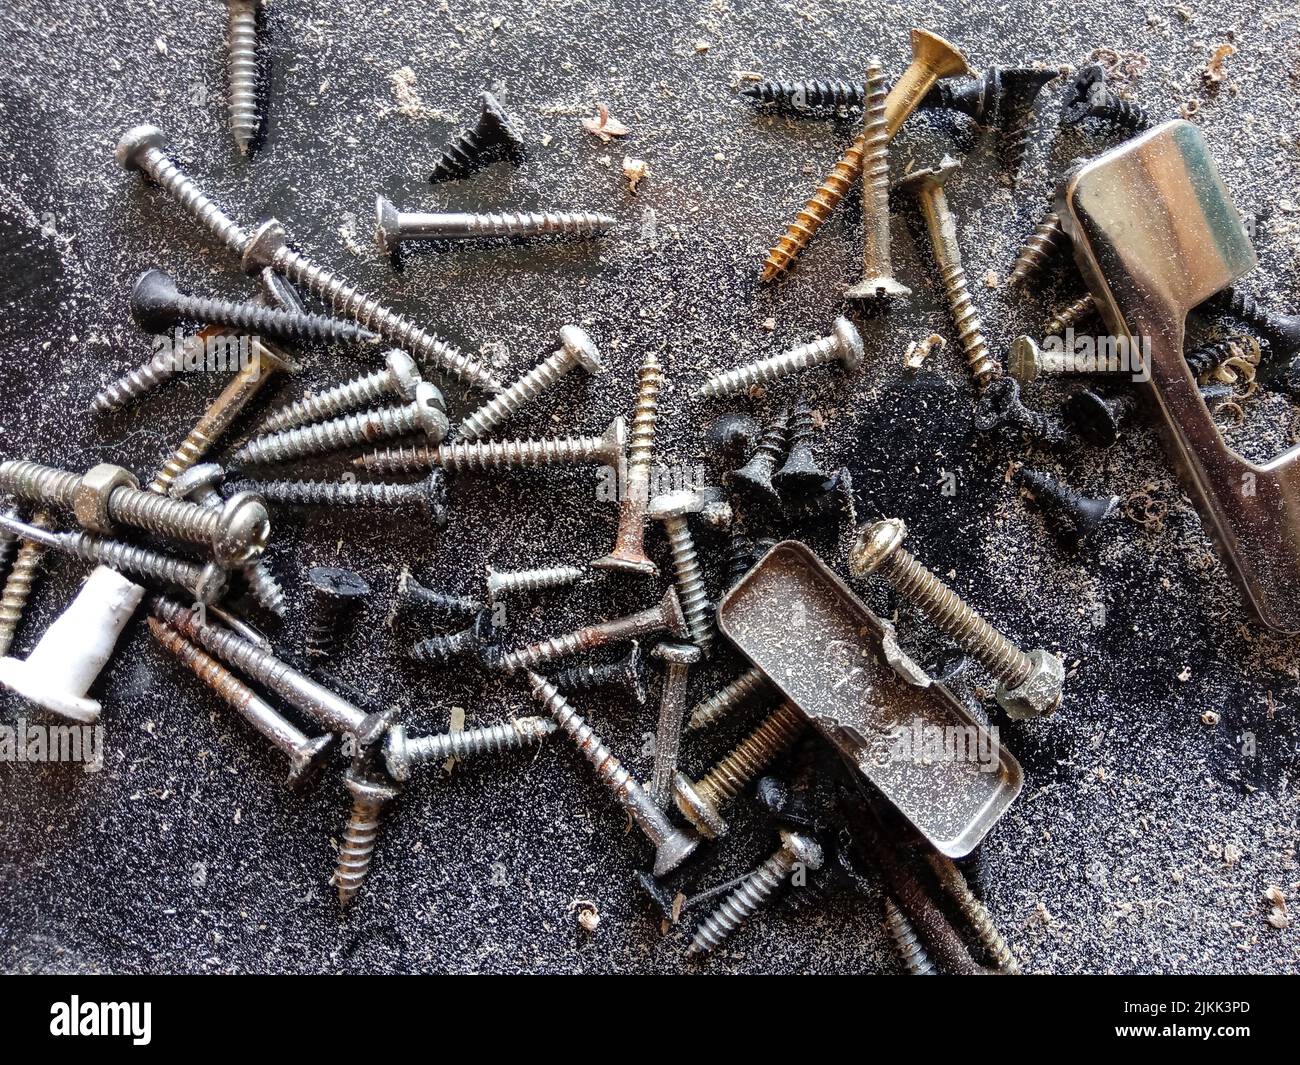 A closeup of rusty screws on the ground Stock Photo